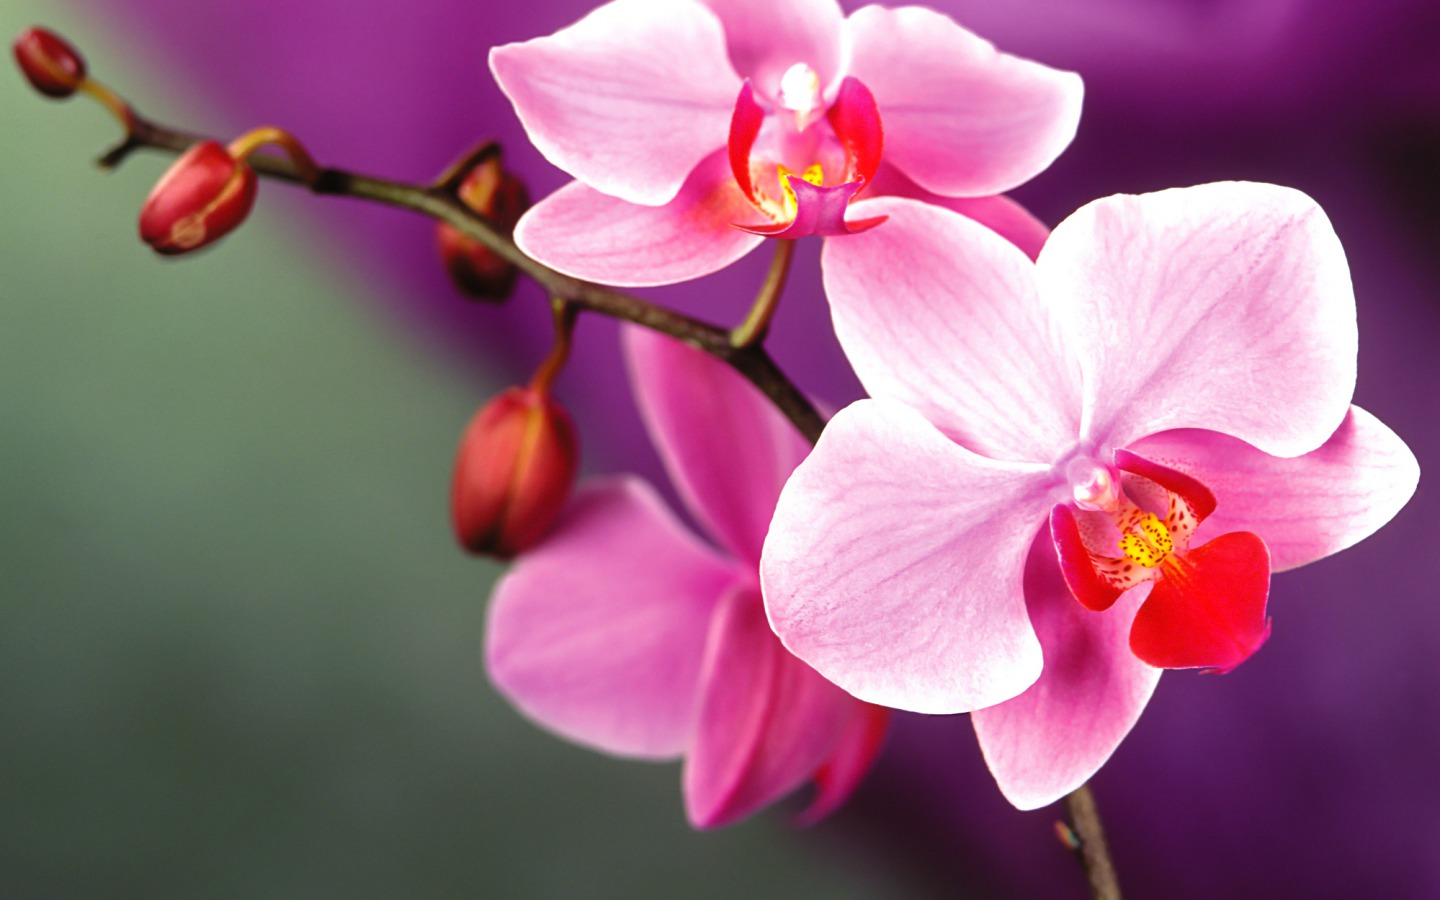 Orchid-flowers-35255212-1440-900